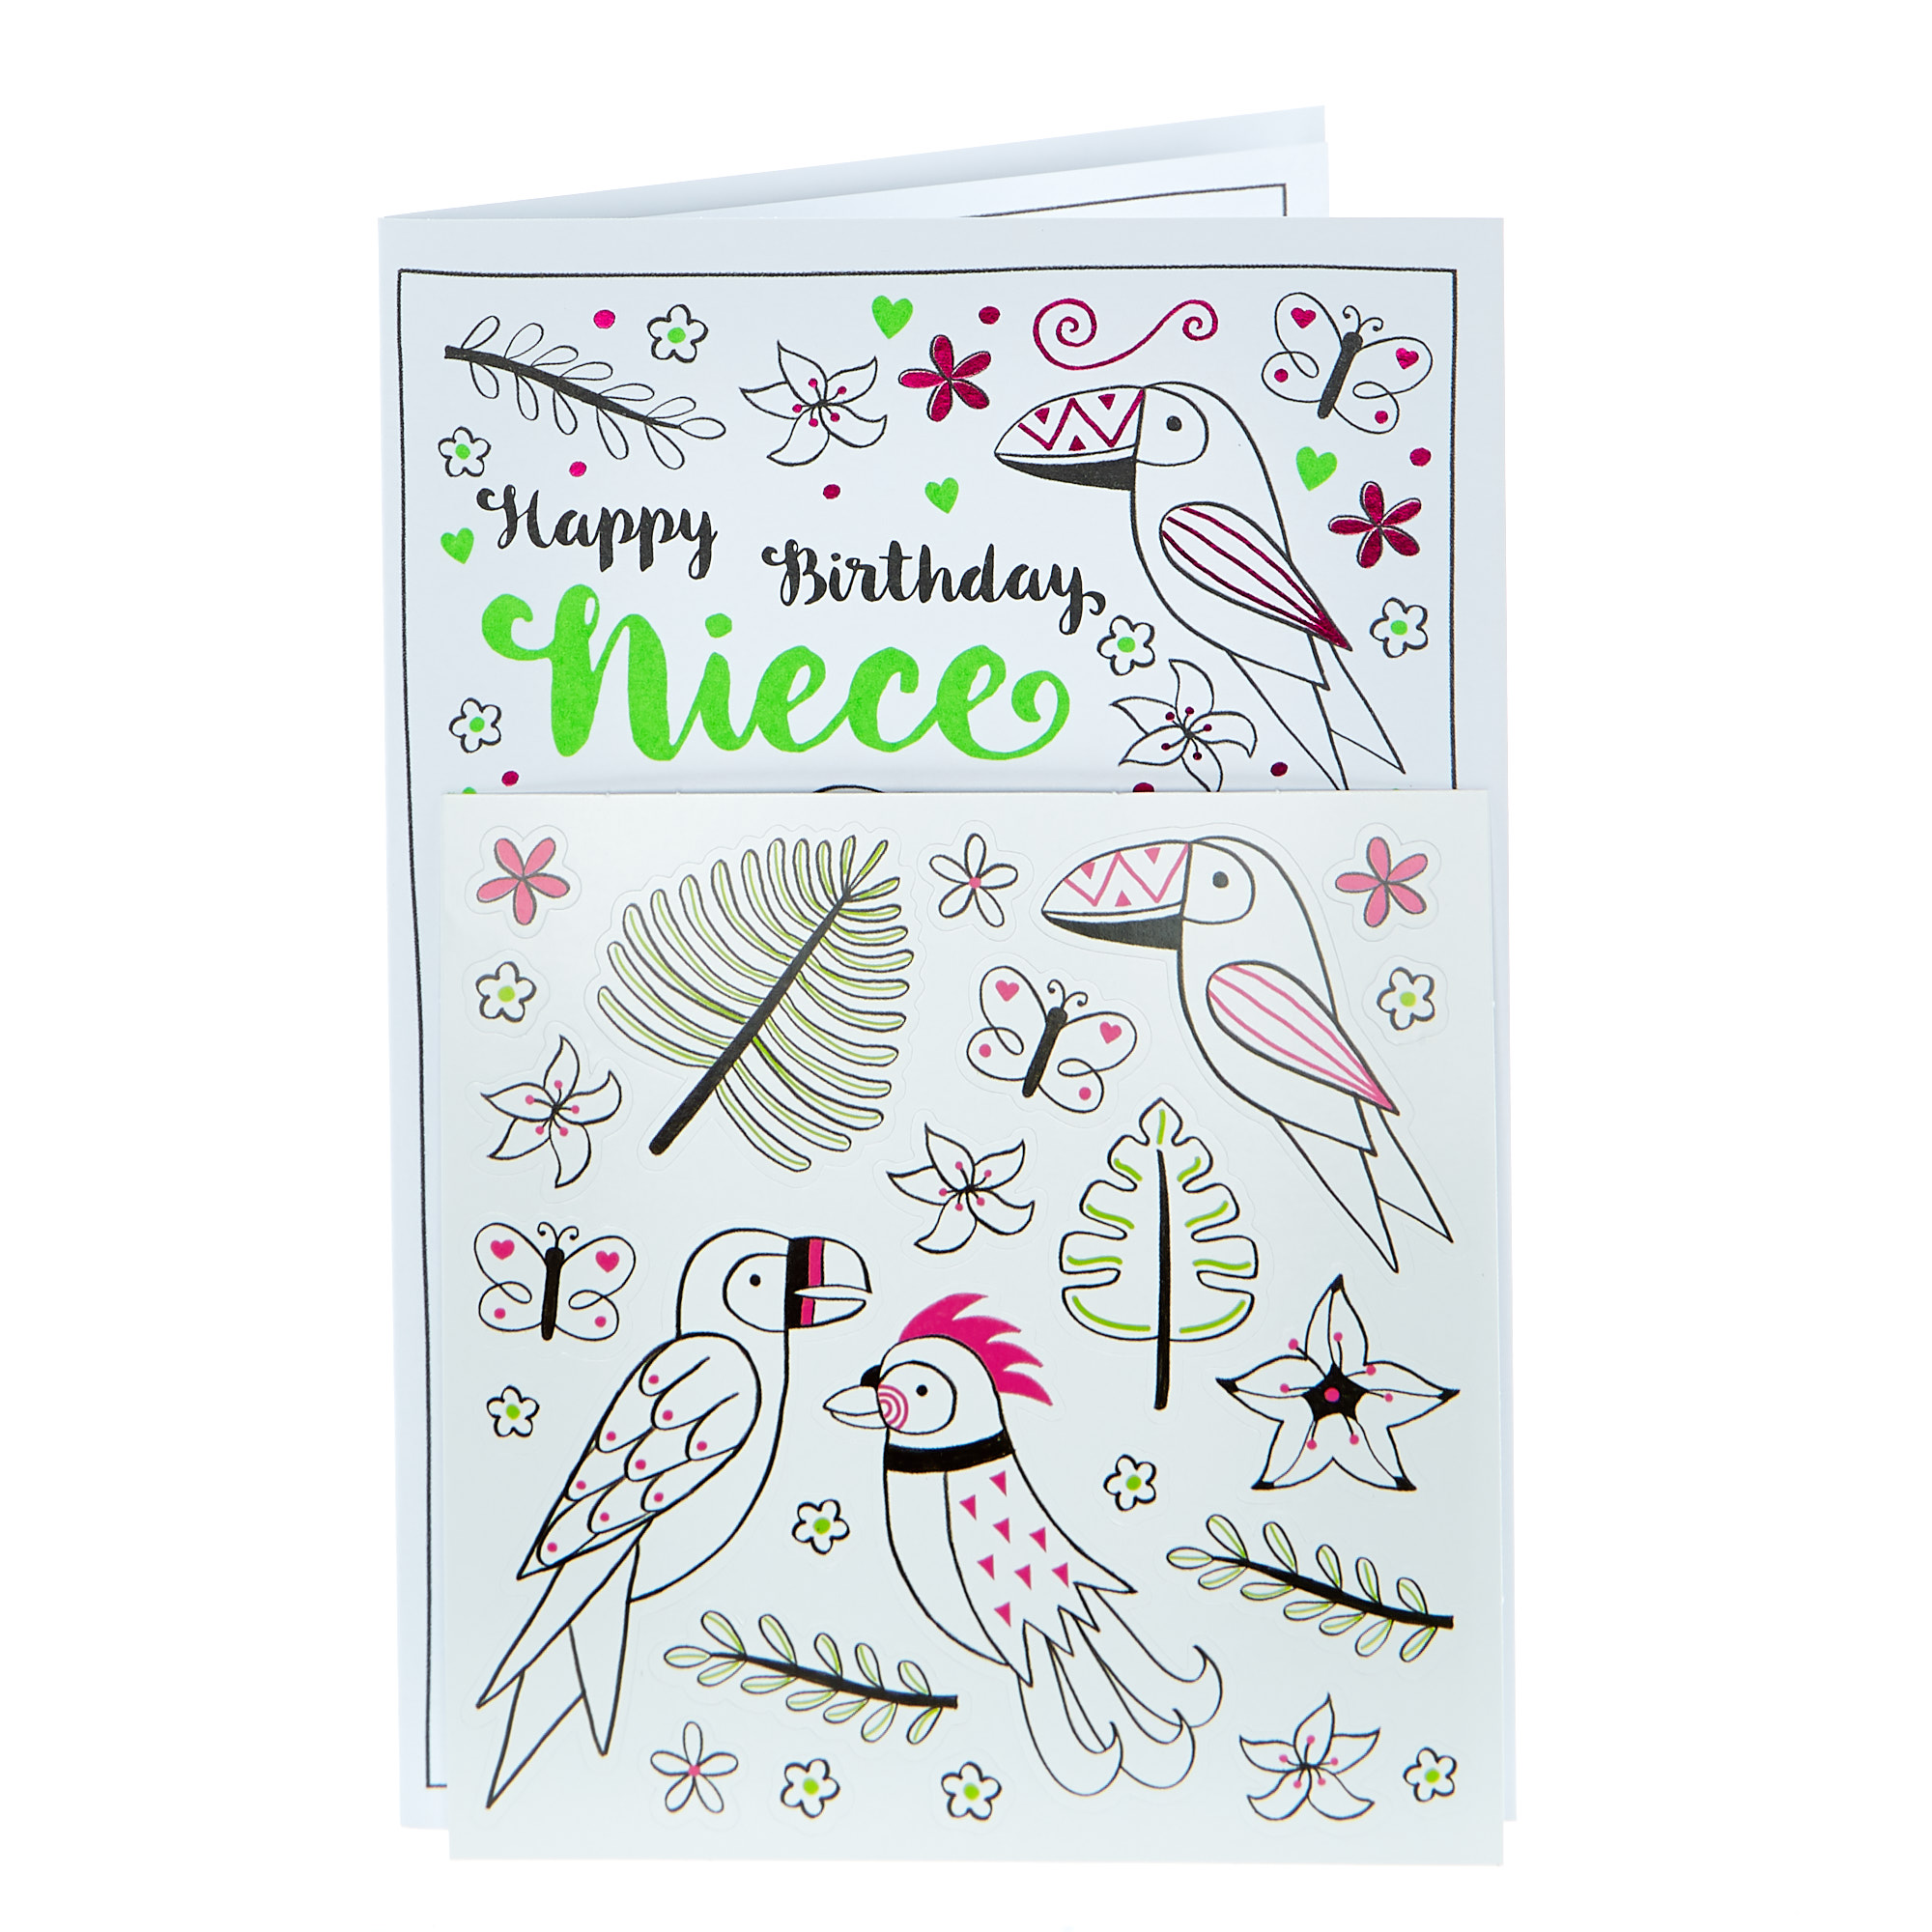 Colour-In Birthday Card - Niece (With Stickers)